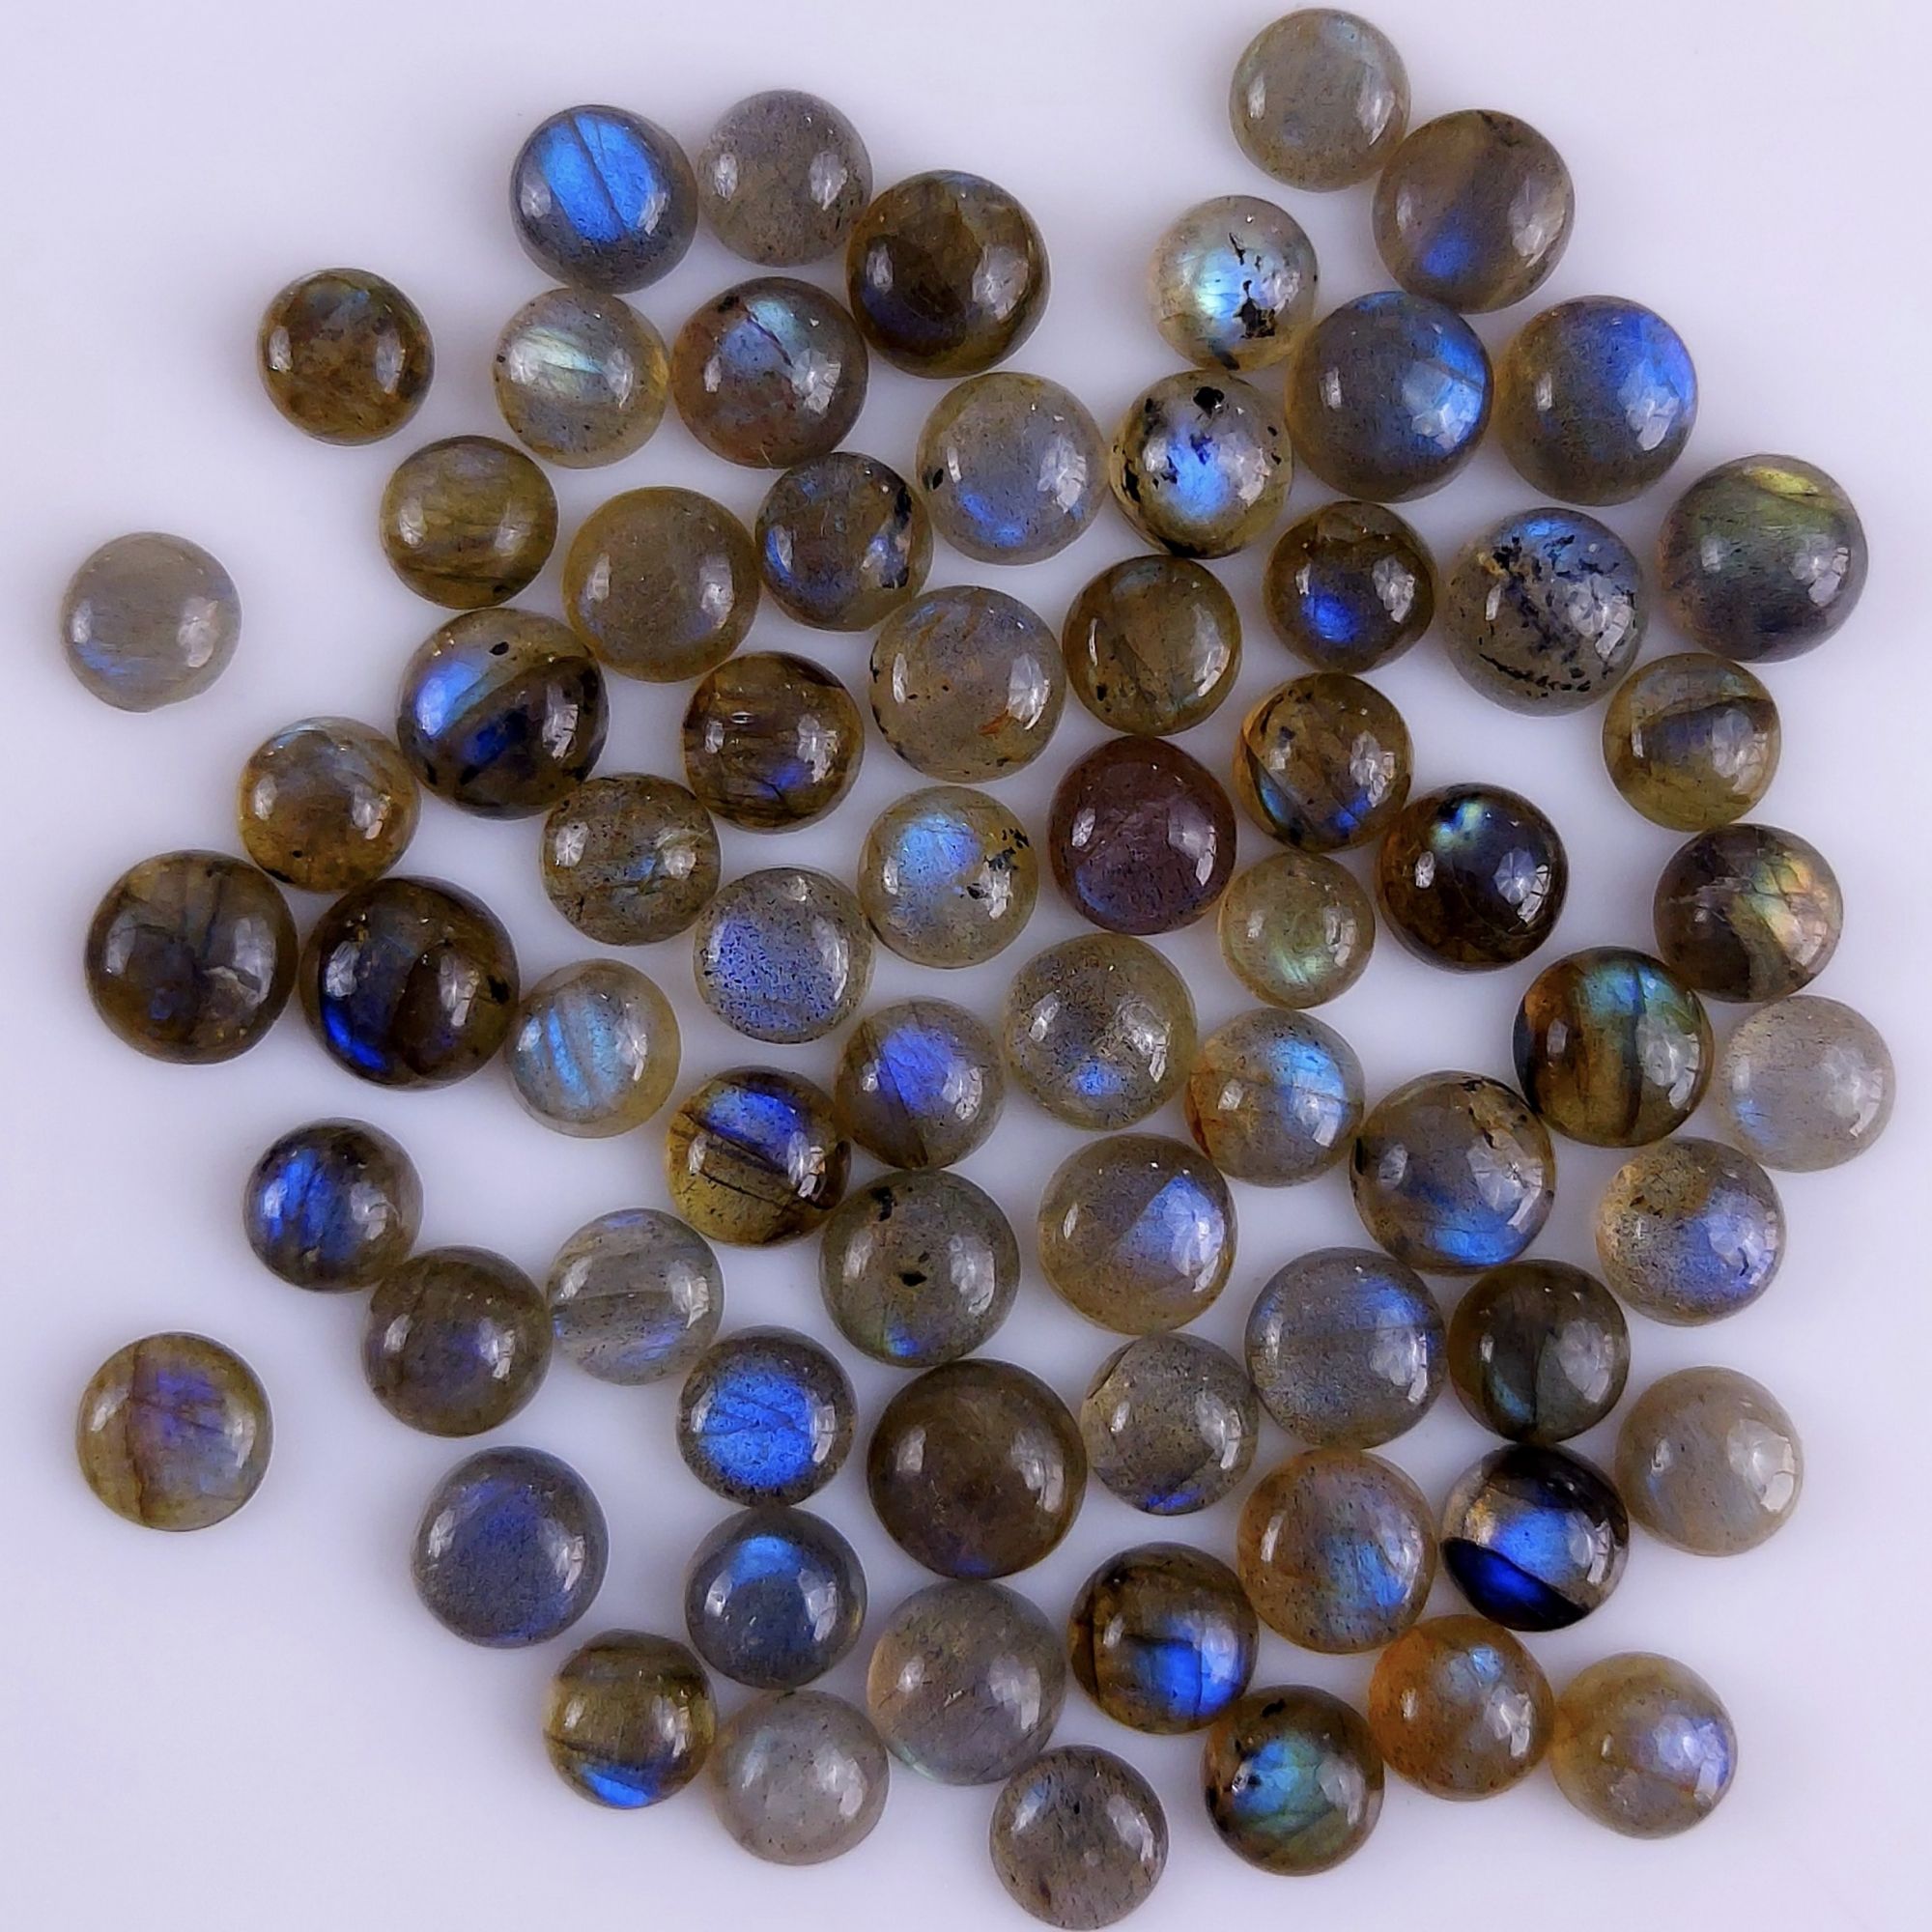 69Pcs 172Cts Natural Blue Labradorite Calibrated Cabochon Round Shape Gemstone Lot For Jewelry Making 5x5mm#740